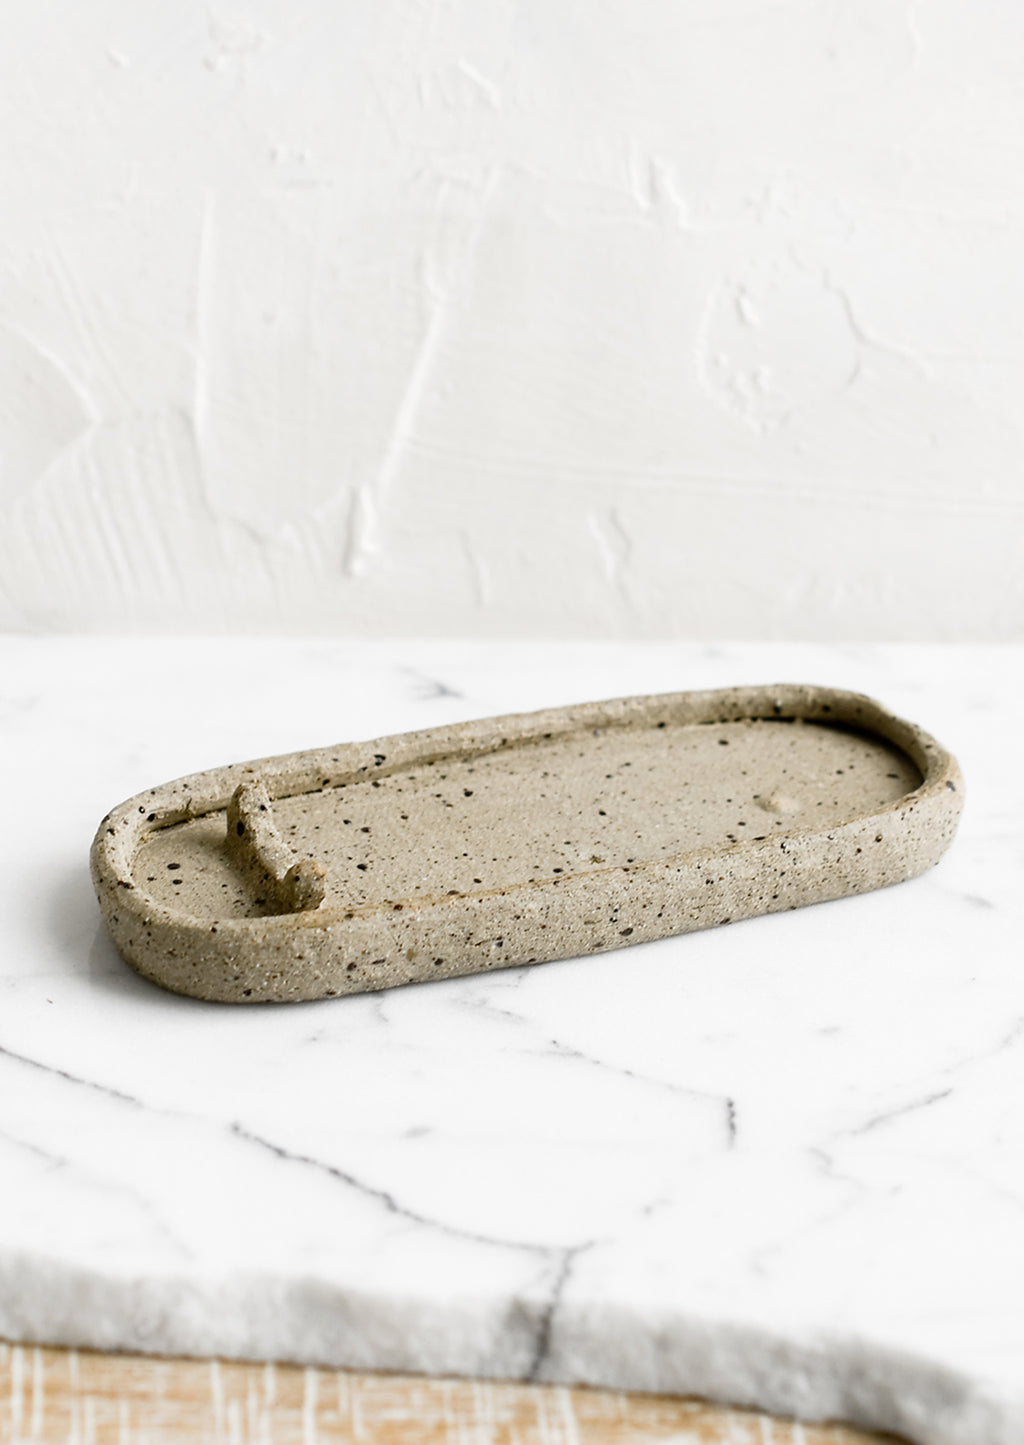 1: An oval shaped ceramic dish for burning palo santo.